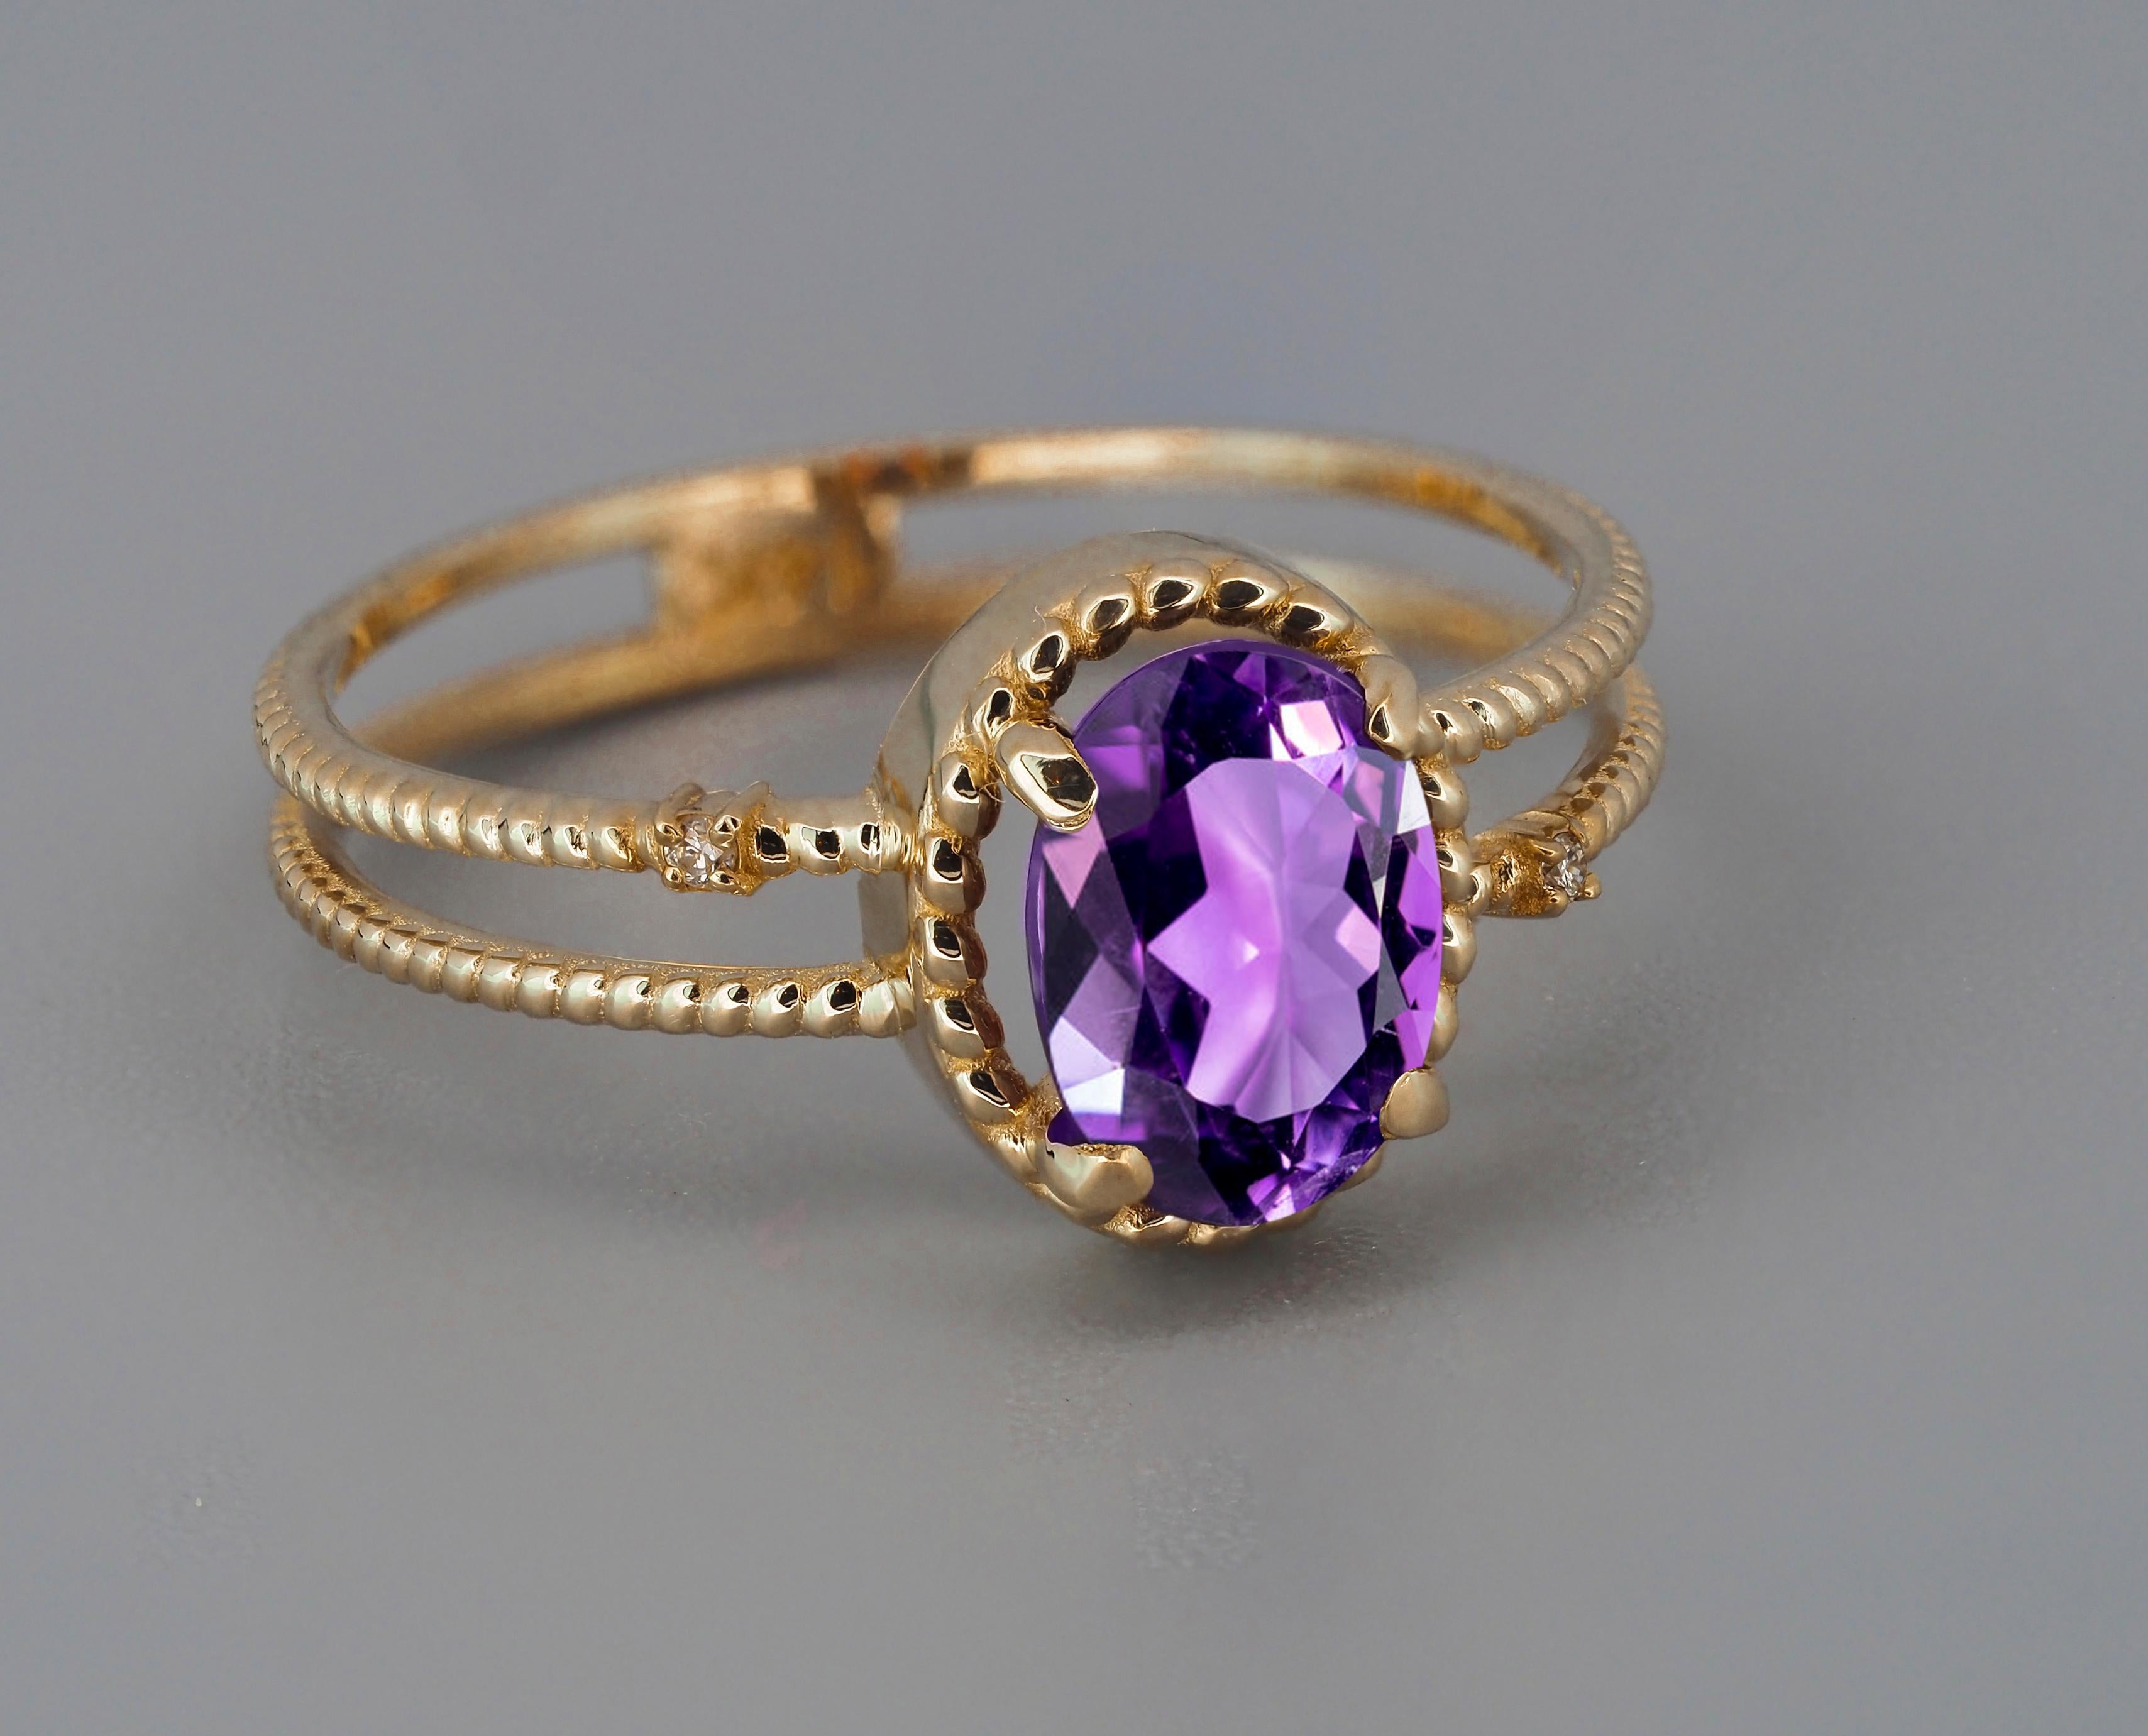 Modern Amethyst Gold Ring, Oval Amethyst Ring, 14k Gold Ring with Amethyst For Sale